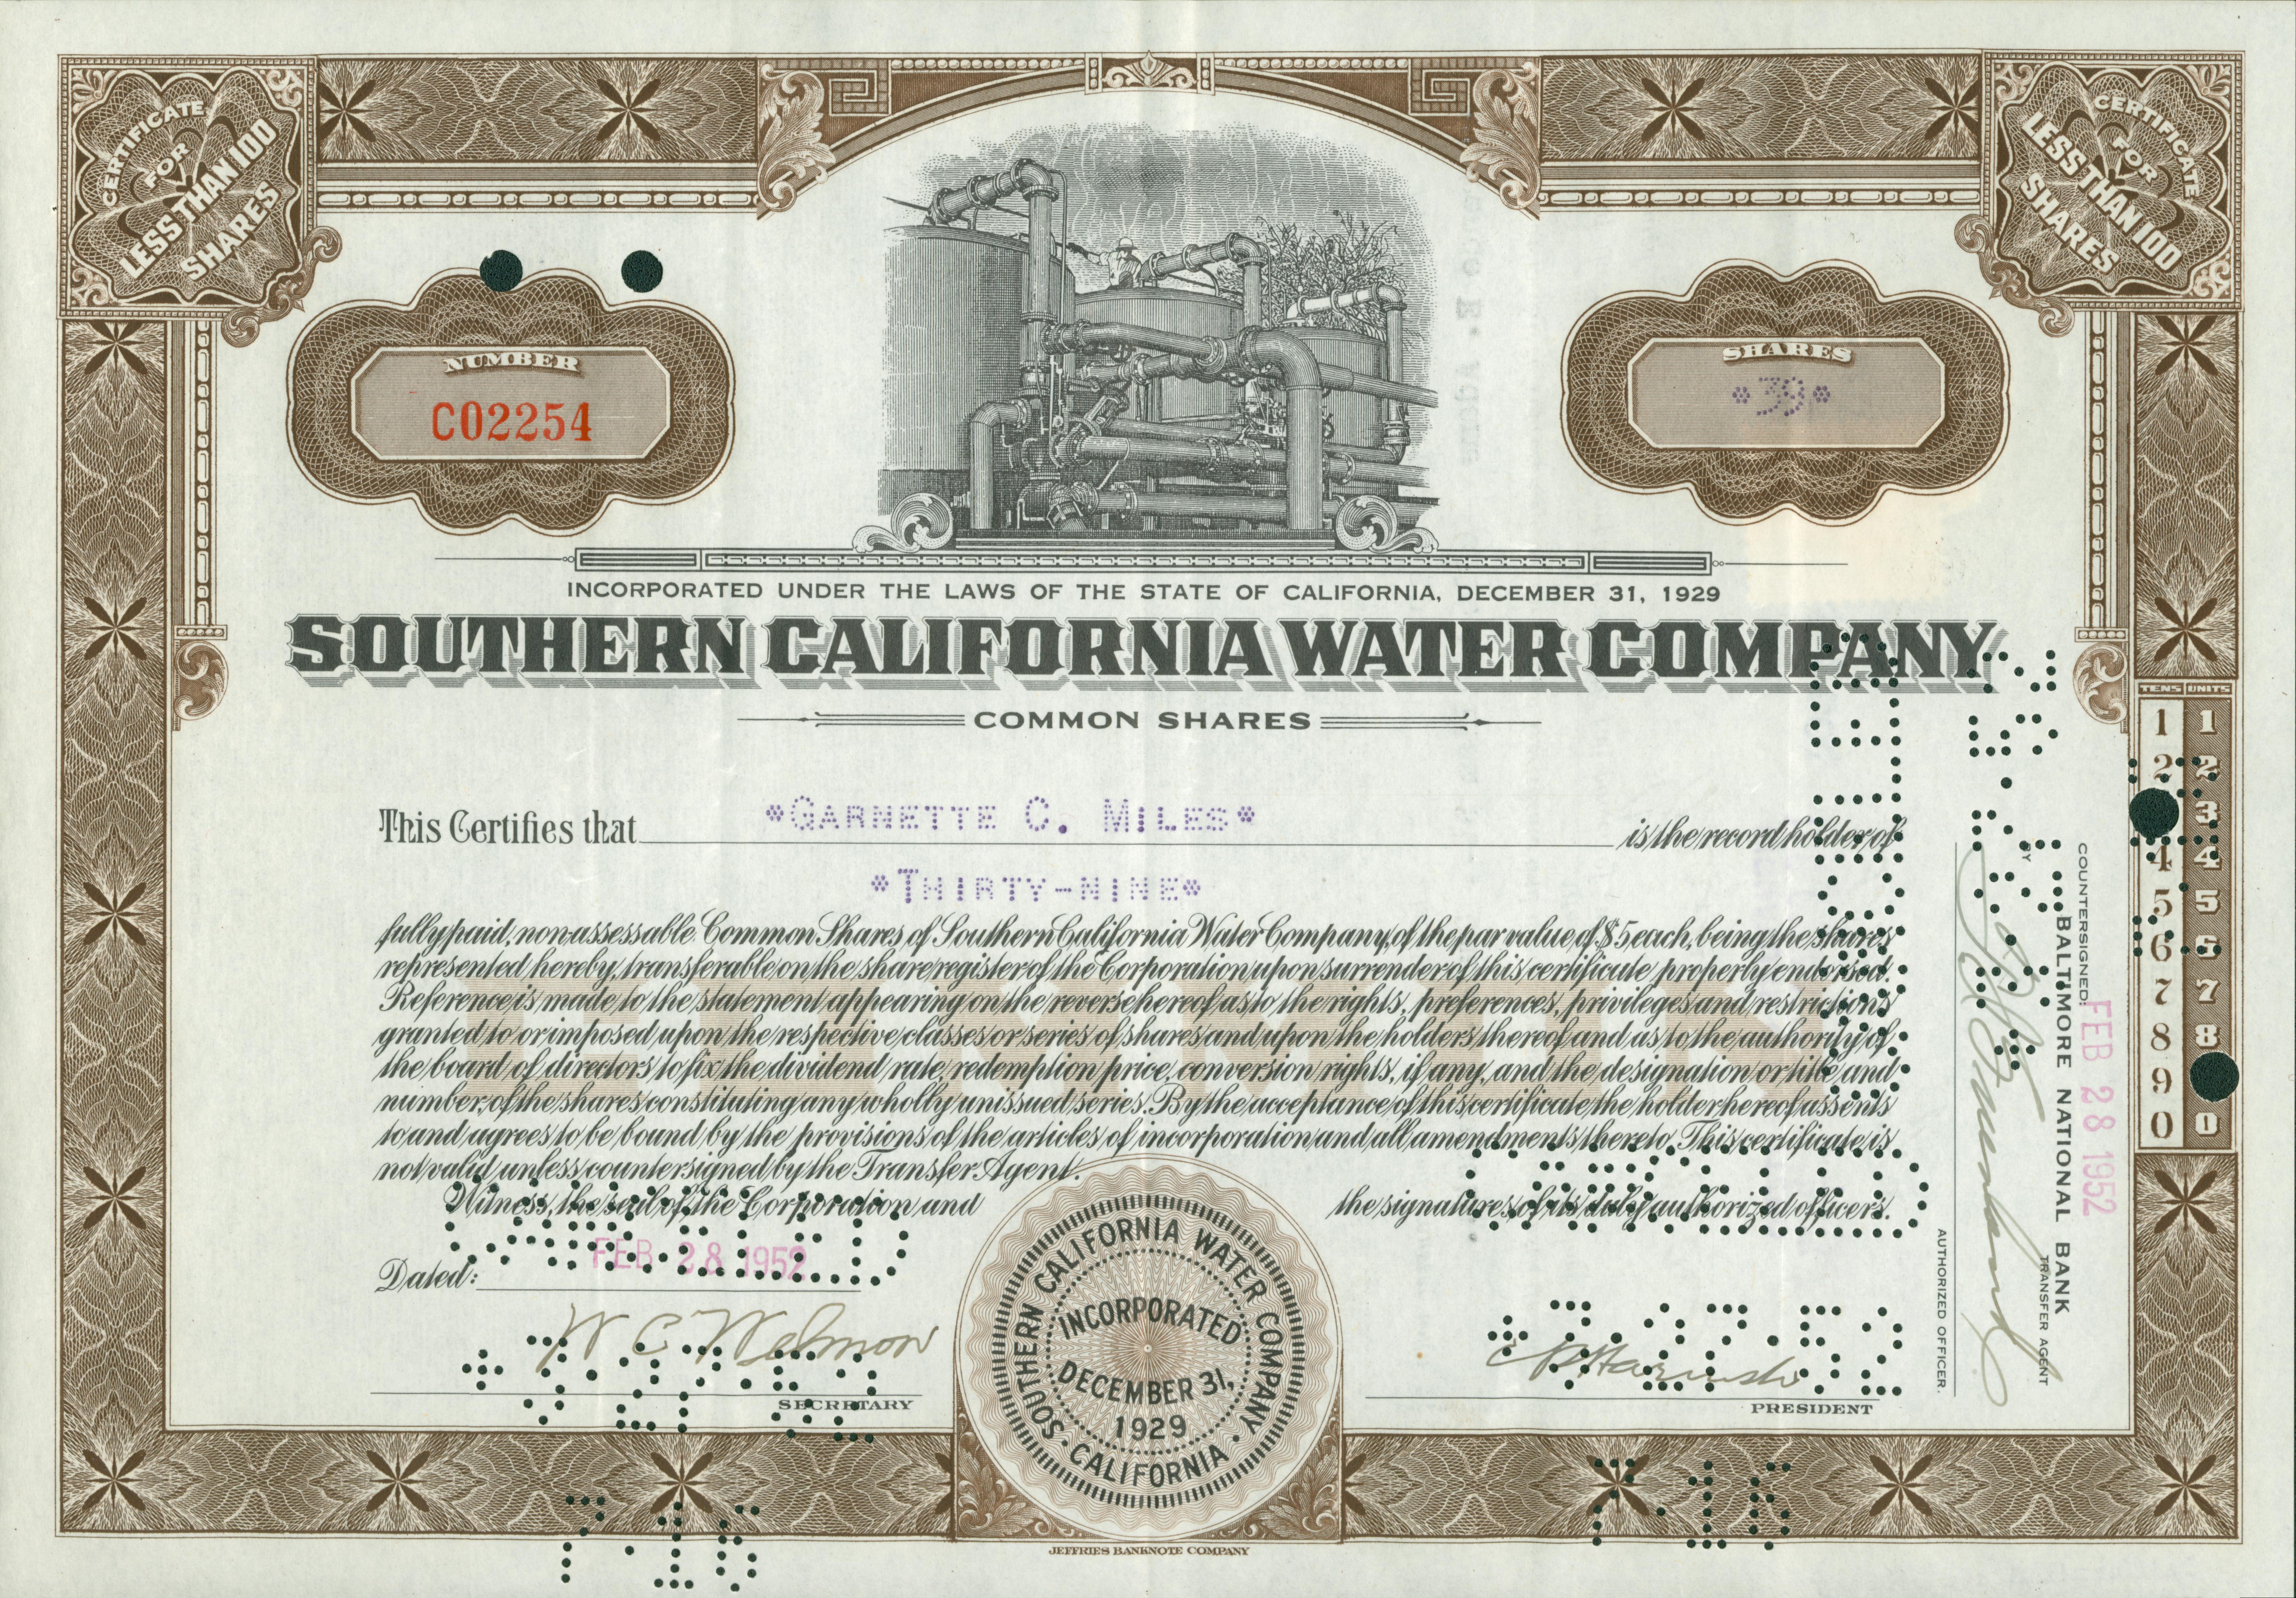 Shows a Southern California Water Company certificate